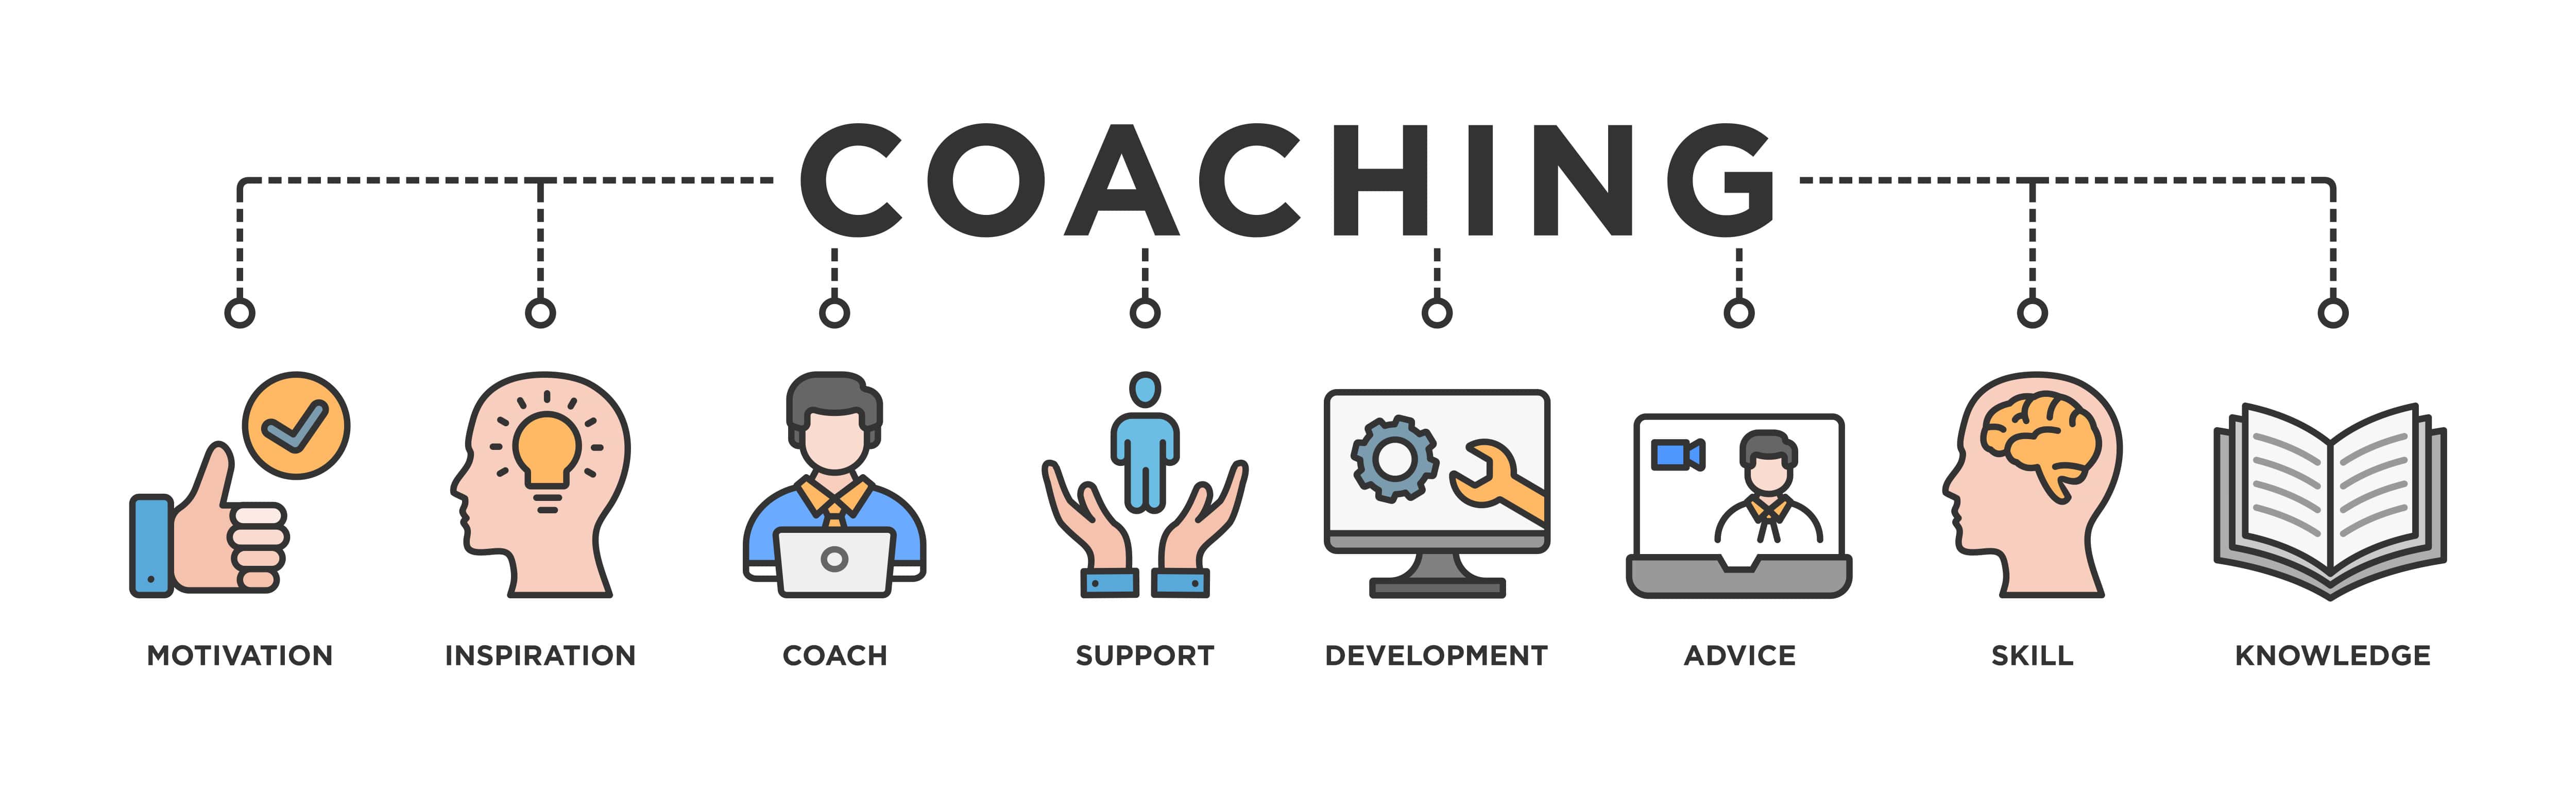 What are the core skills of a career coach